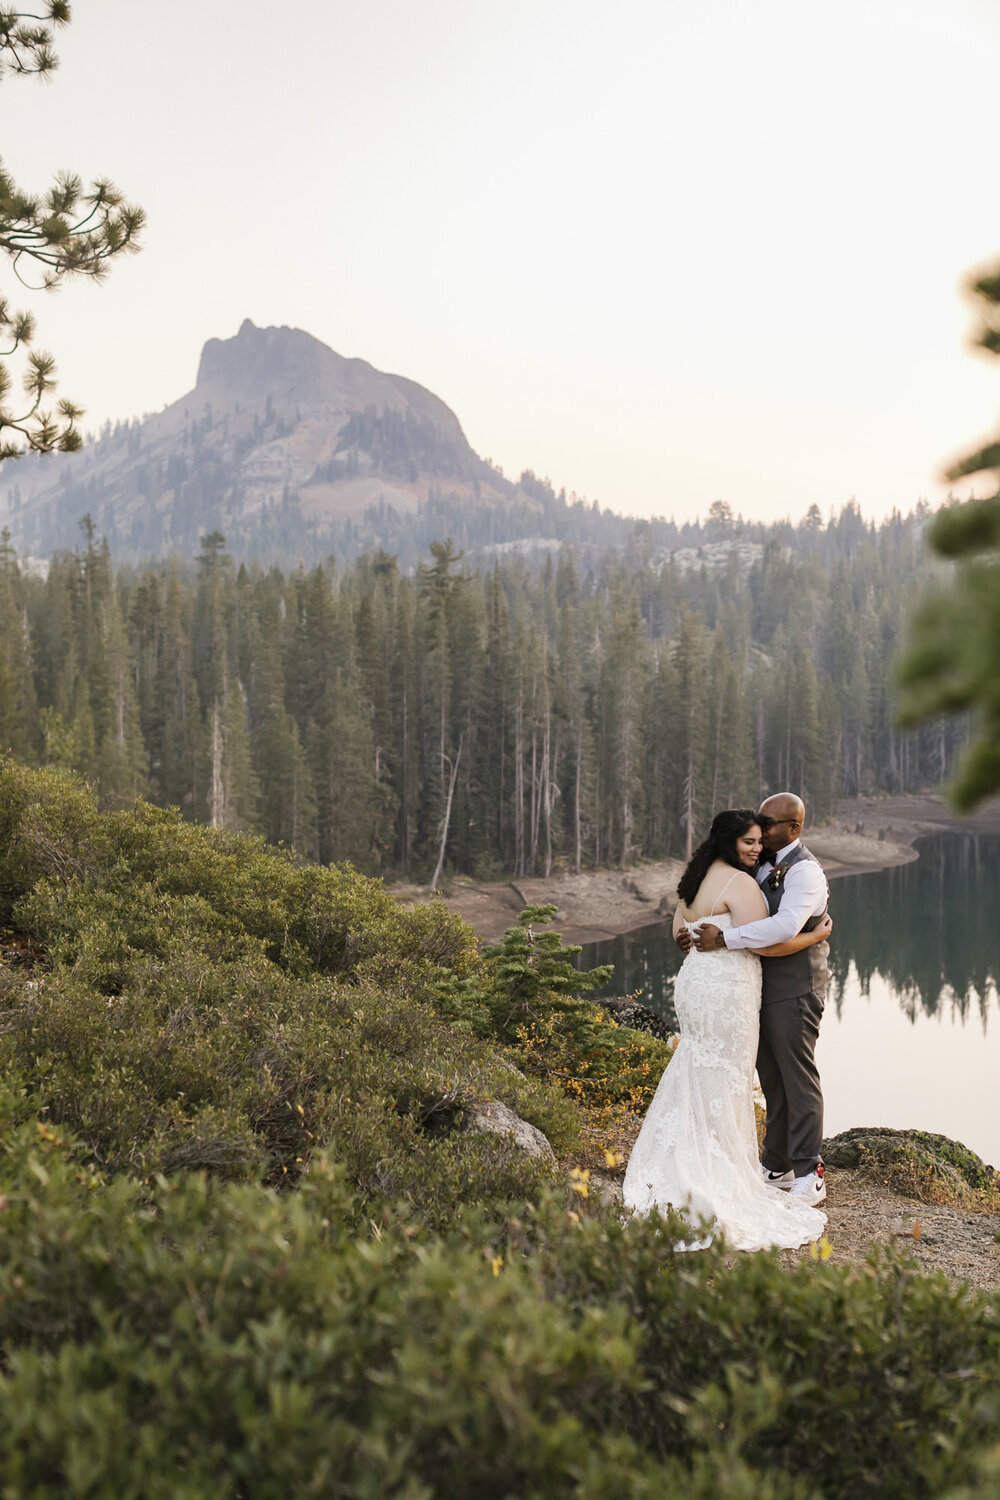 Wedding couple hold each other close with mountain peak in the distance behind them in Tahoe forest